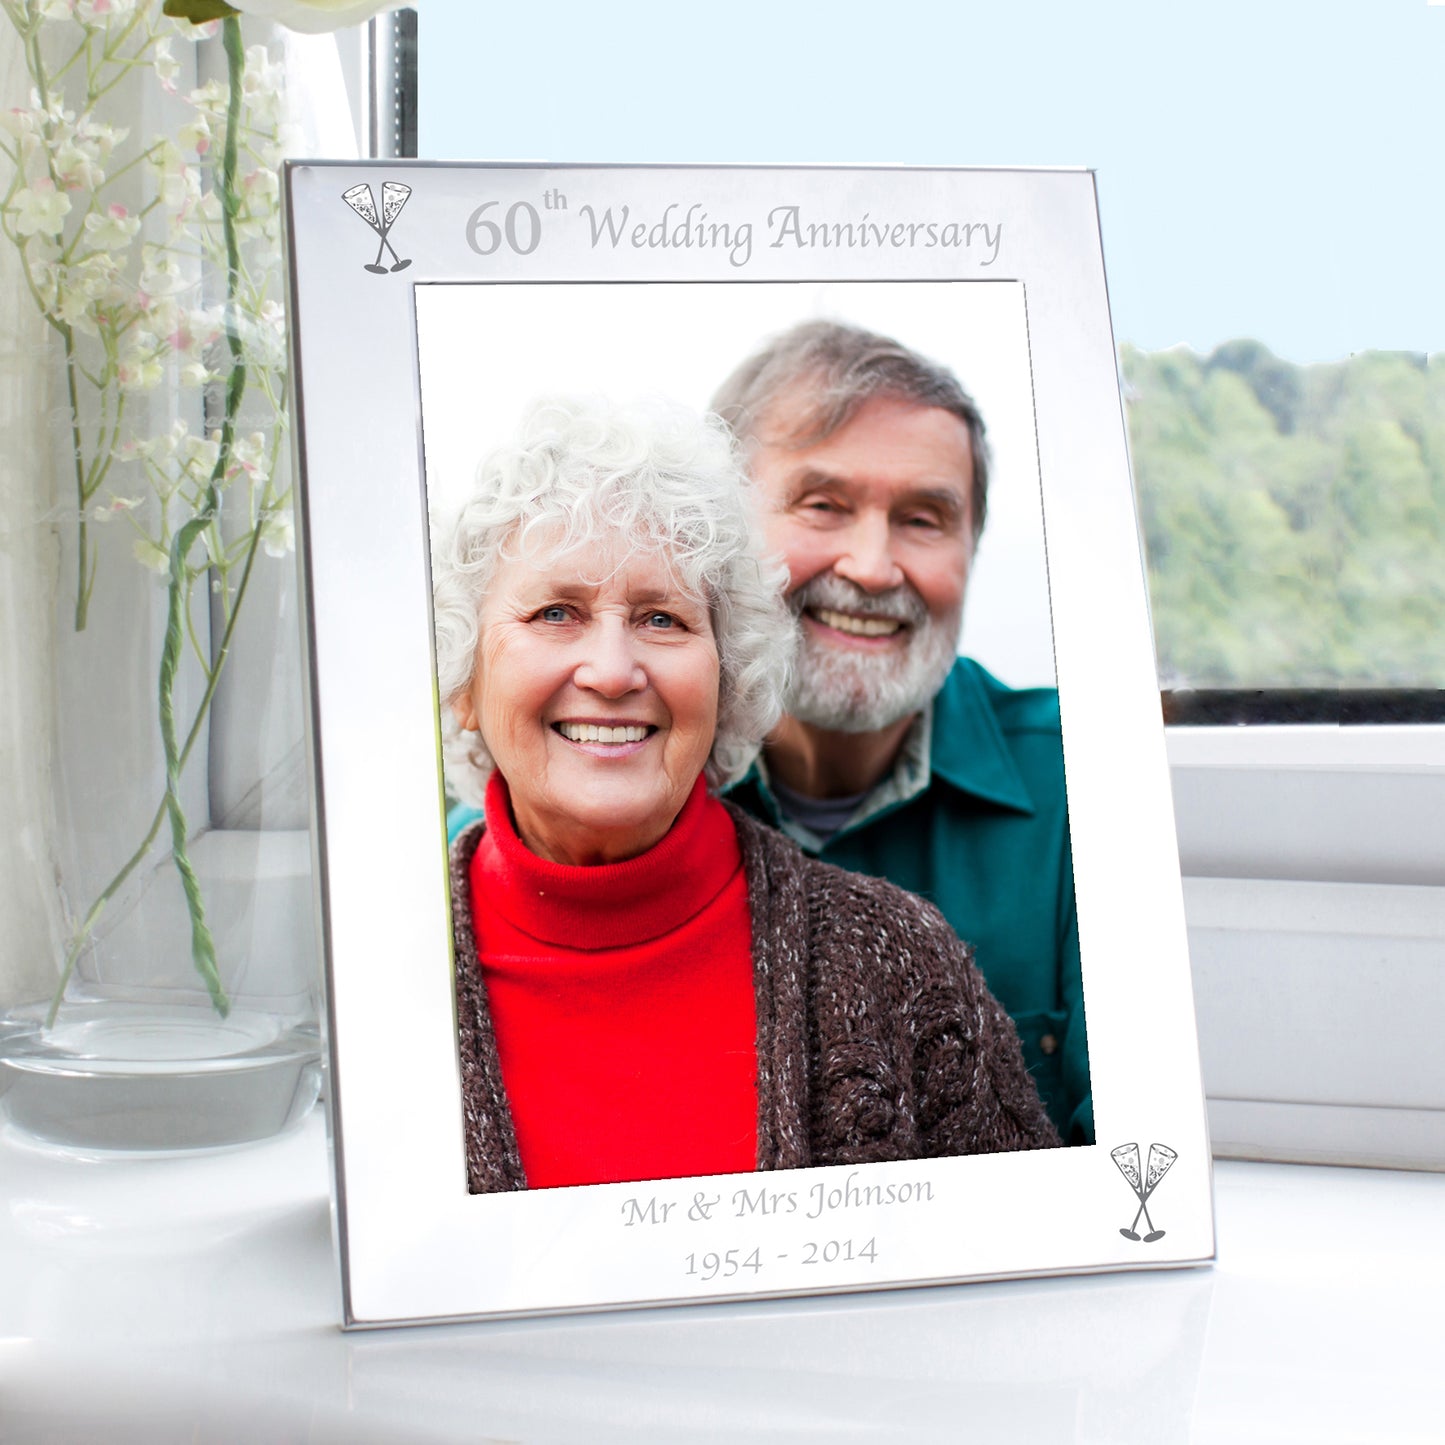 Personalised Silver 5x7 60th Wedding Anniversary Photo Frame - Personalise It!